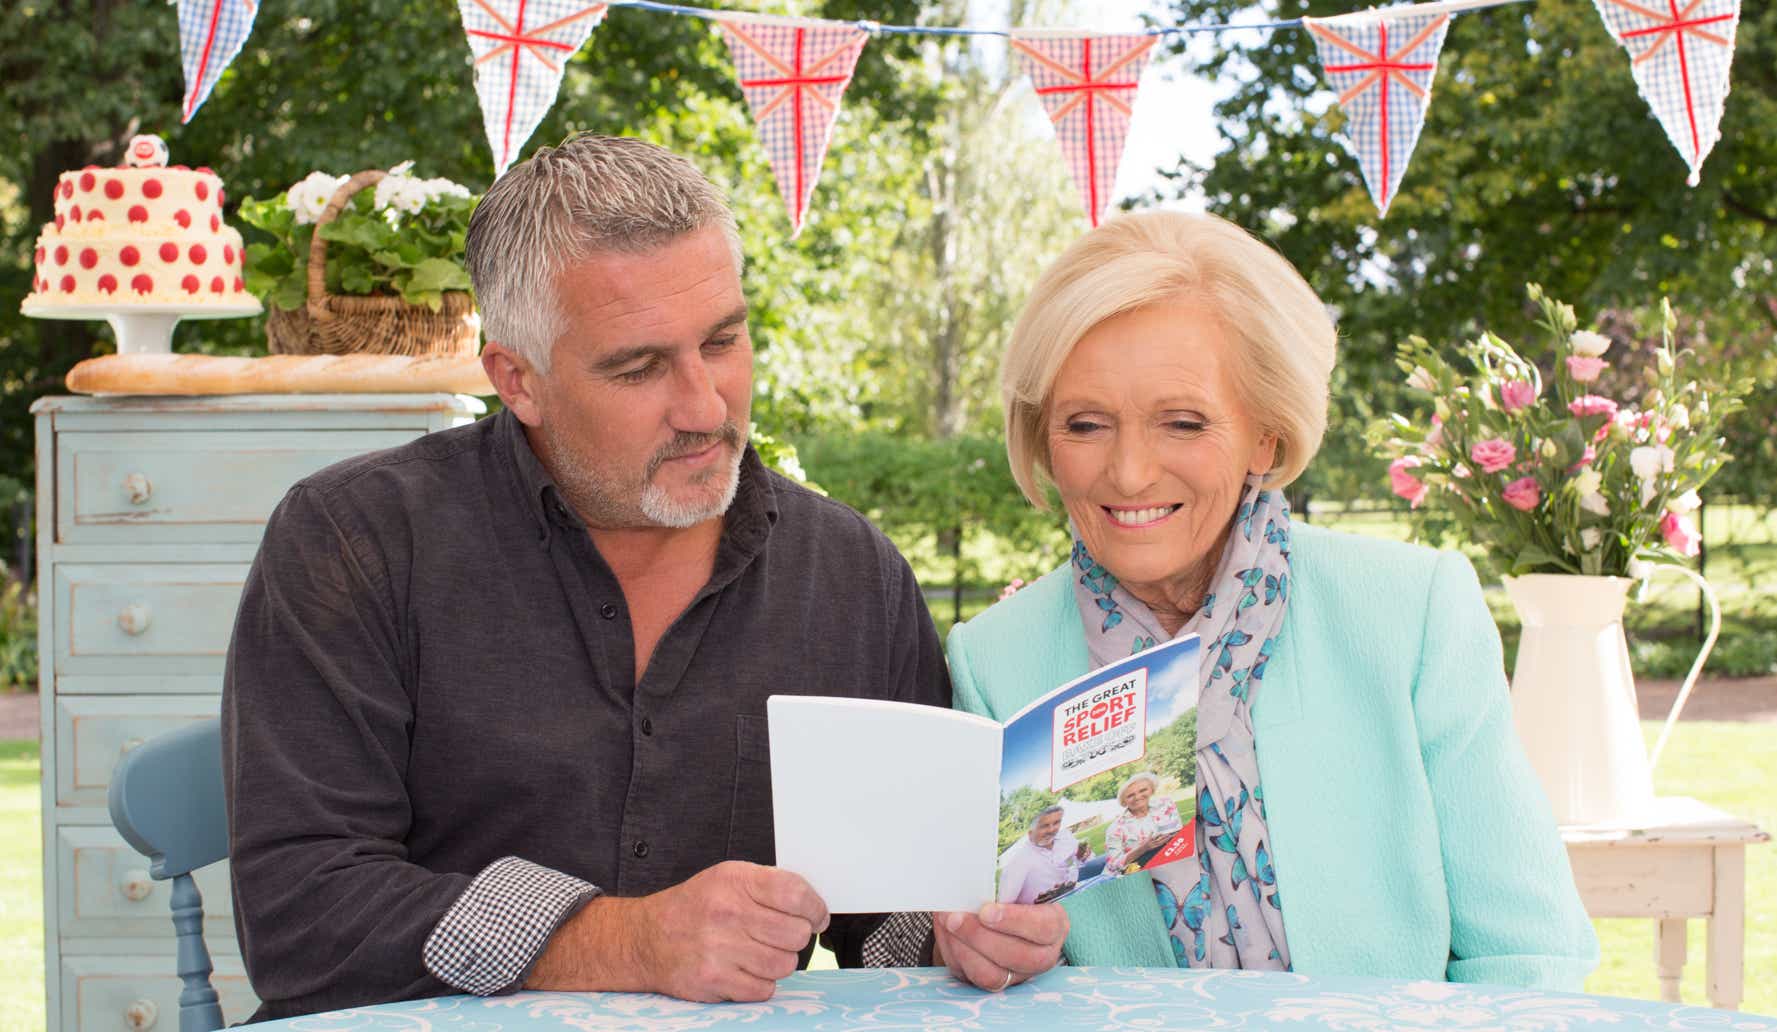 Judges, Paul Hollywood (left) and Mary Berry (right) of the comic relief special episode of the 'Great British Bake Off'